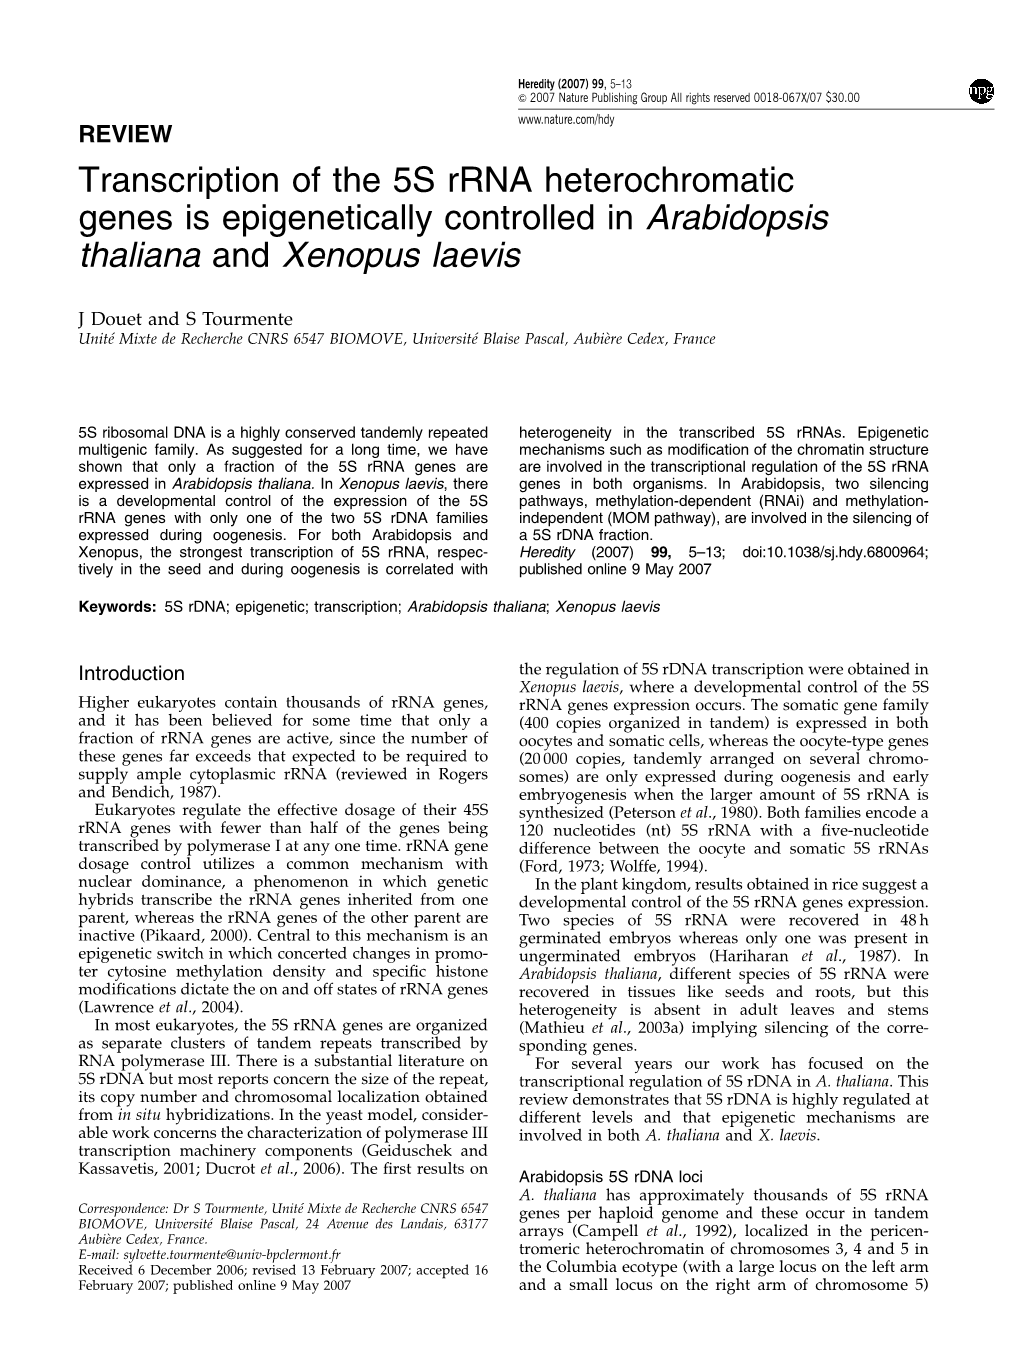 Transcription of the 5S Rrna Heterochromatic Genes Is Epigenetically Controlled in Arabidopsis Thaliana and Xenopus Laevis